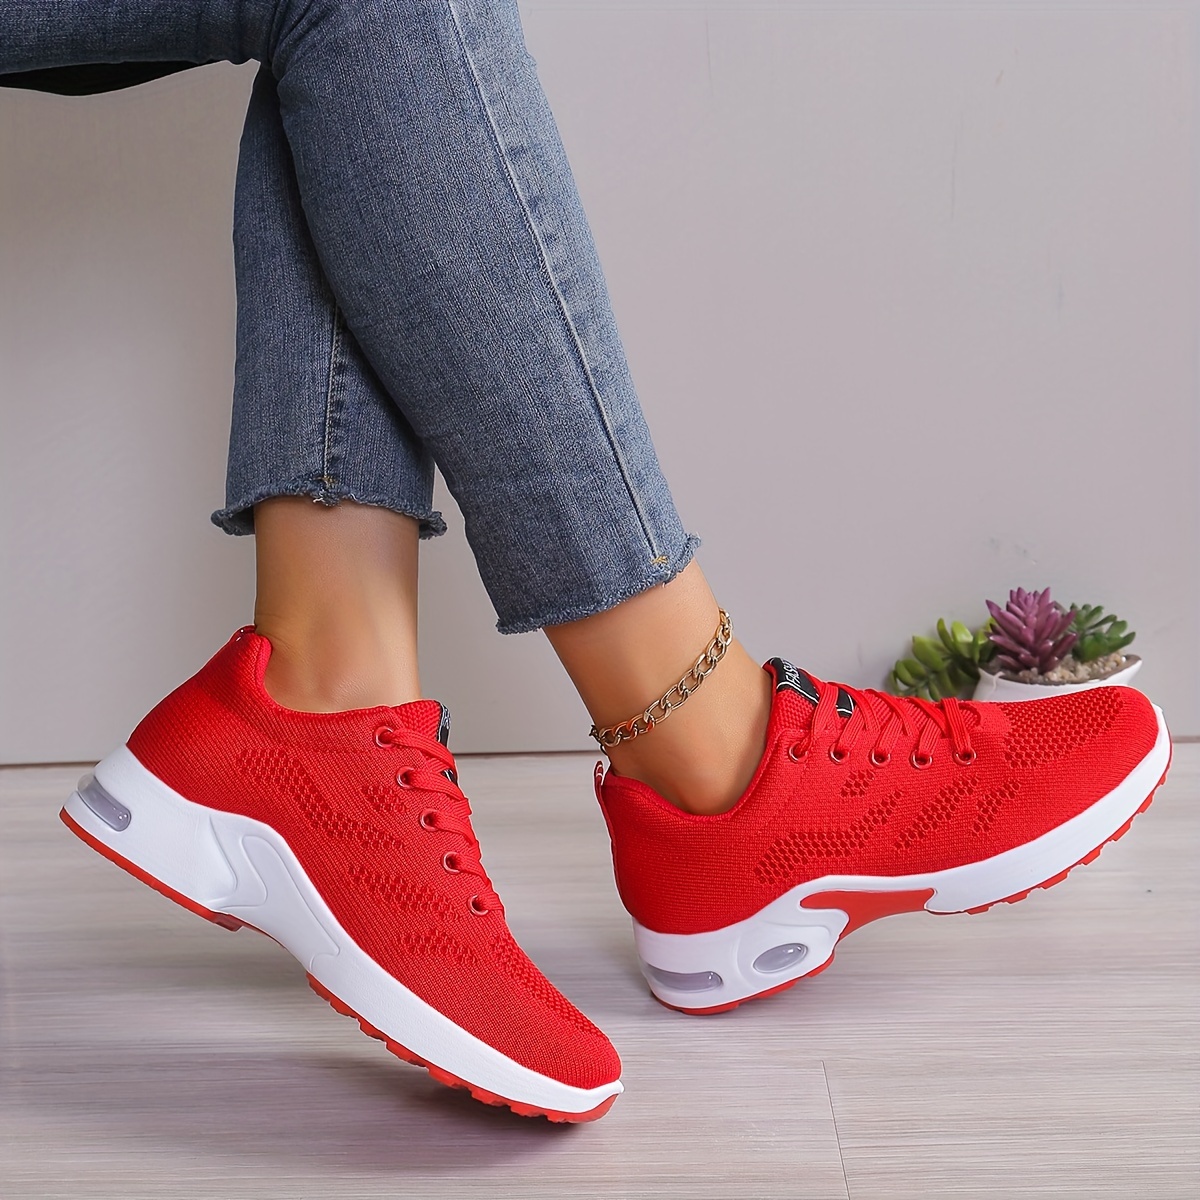 sports shoes women s air cushion comfortable lace knitted details 5